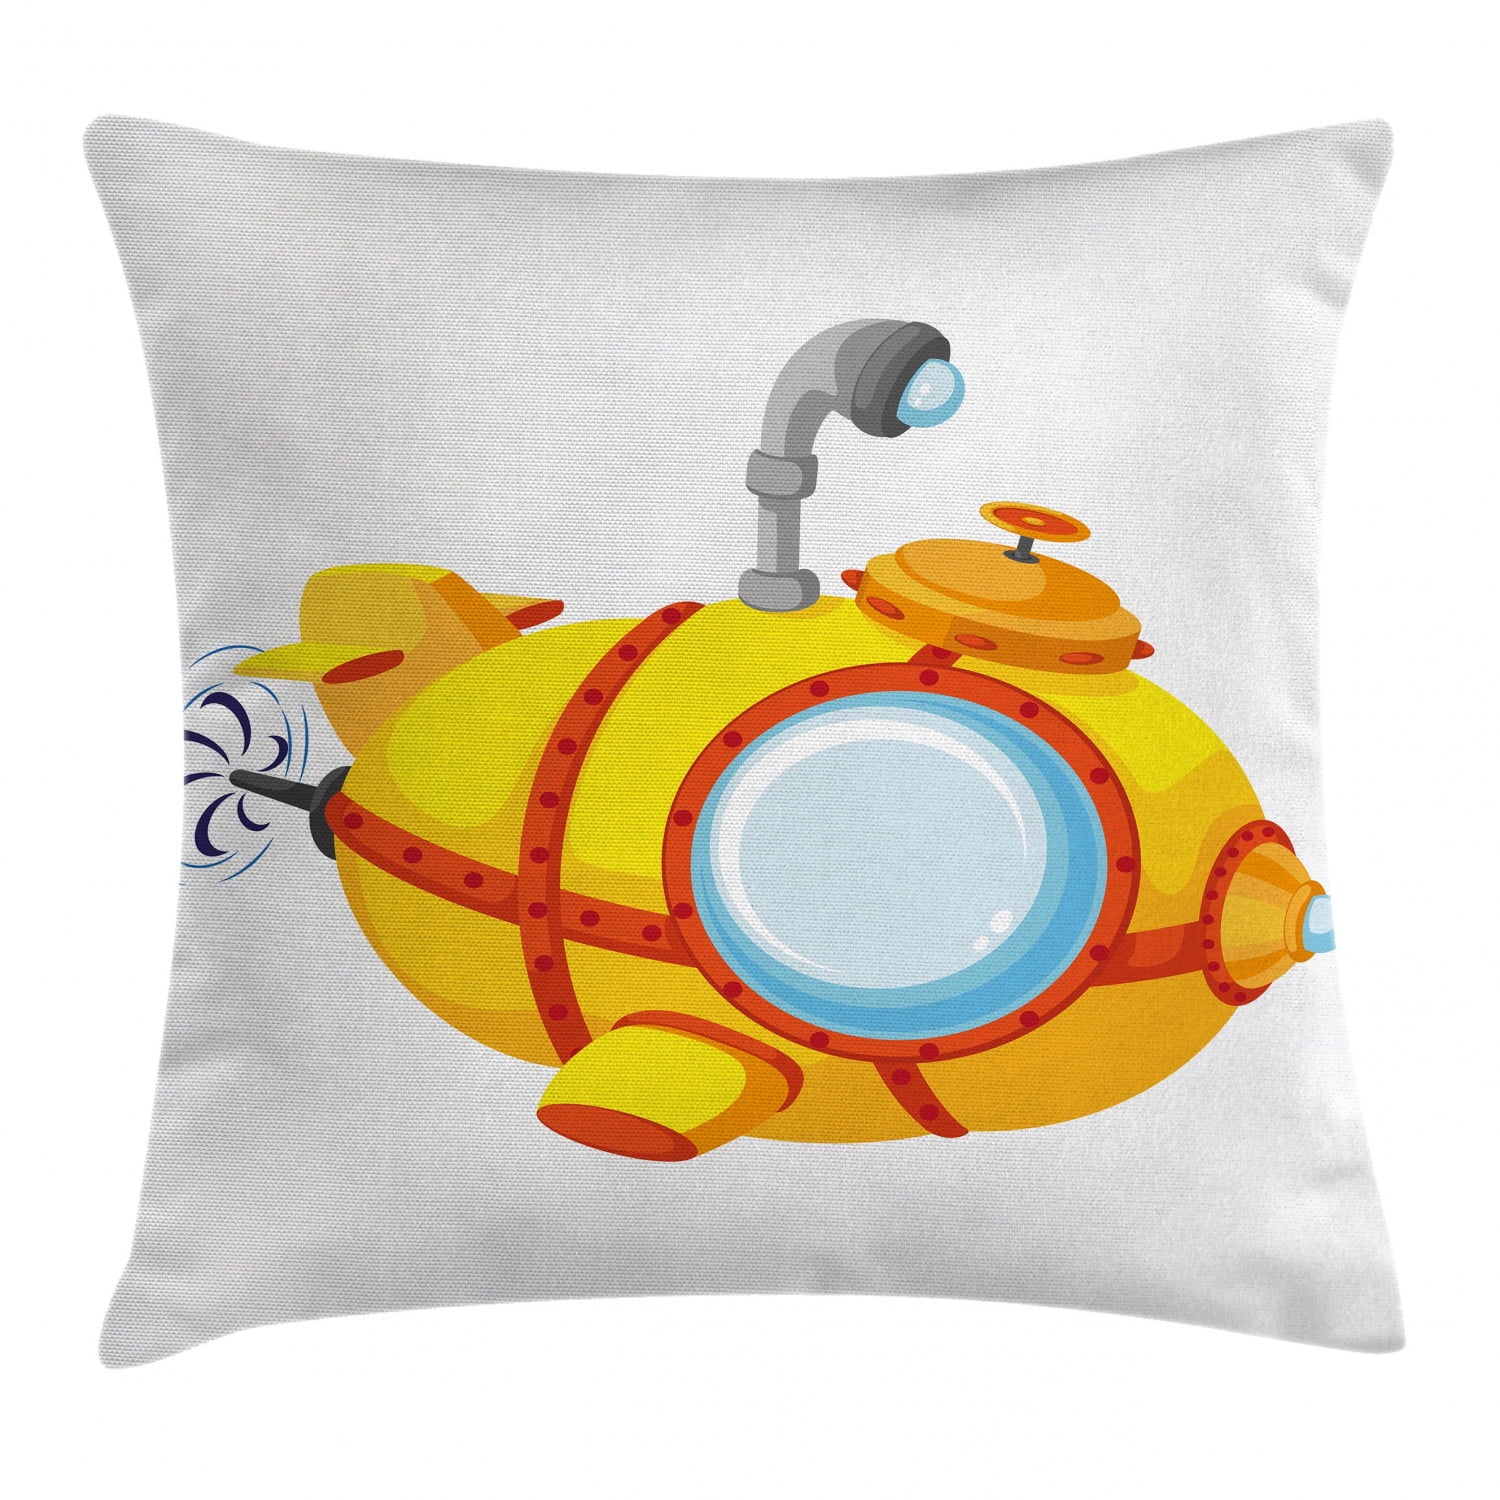 Yellow Submarine Throw Pillow Cases Cushion Covers Ambesonne Home Decor 8 Sizes 